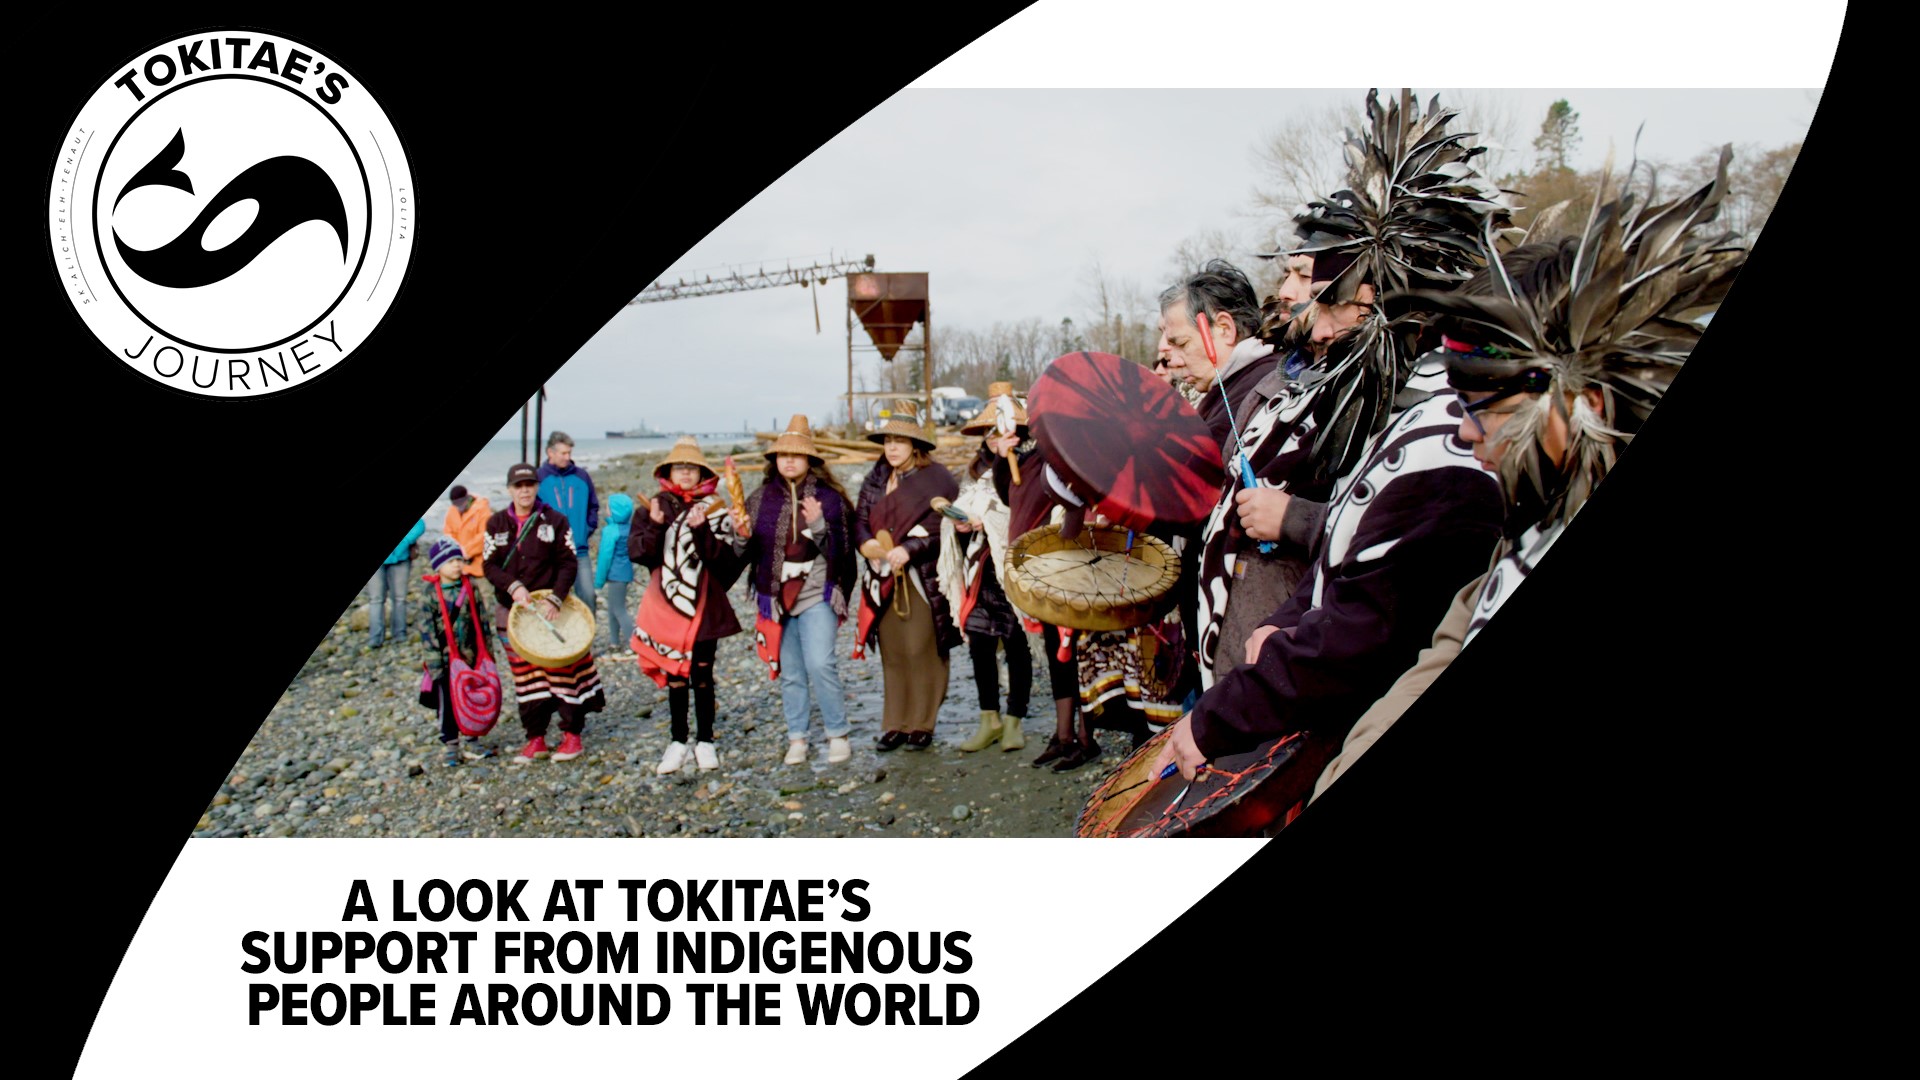 From the Republic of Tuva to Irbistuu Mountain in Russia, to the shores of Miami, Indigenous groups worldwide are throwing their support behind Tokitae's return.